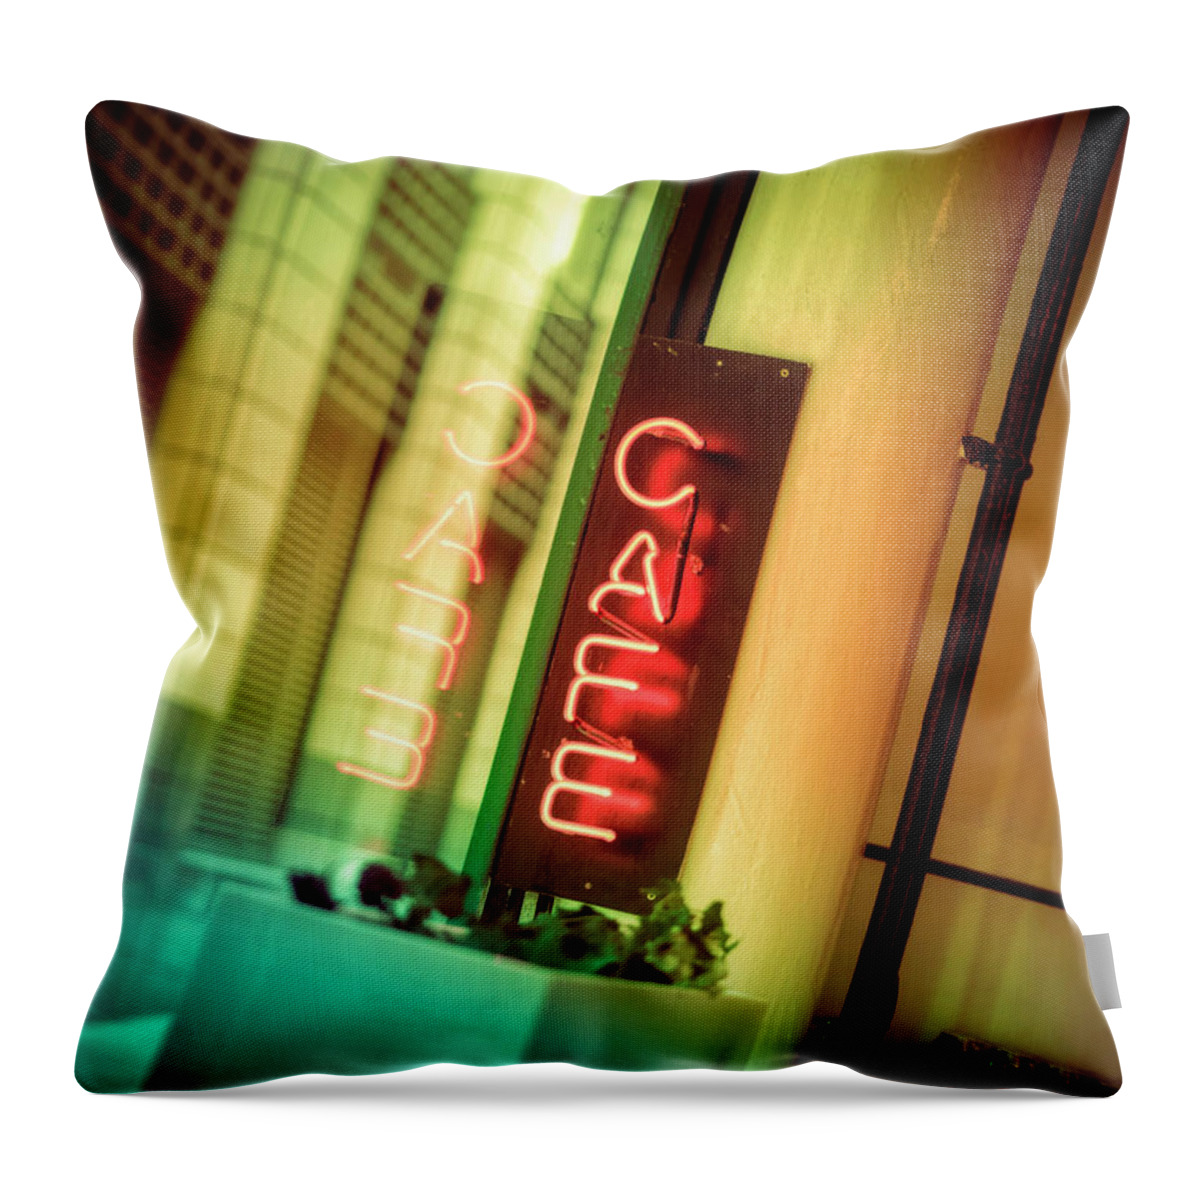 Outdoors Throw Pillow featuring the photograph Cafe Sign by Owen Smith